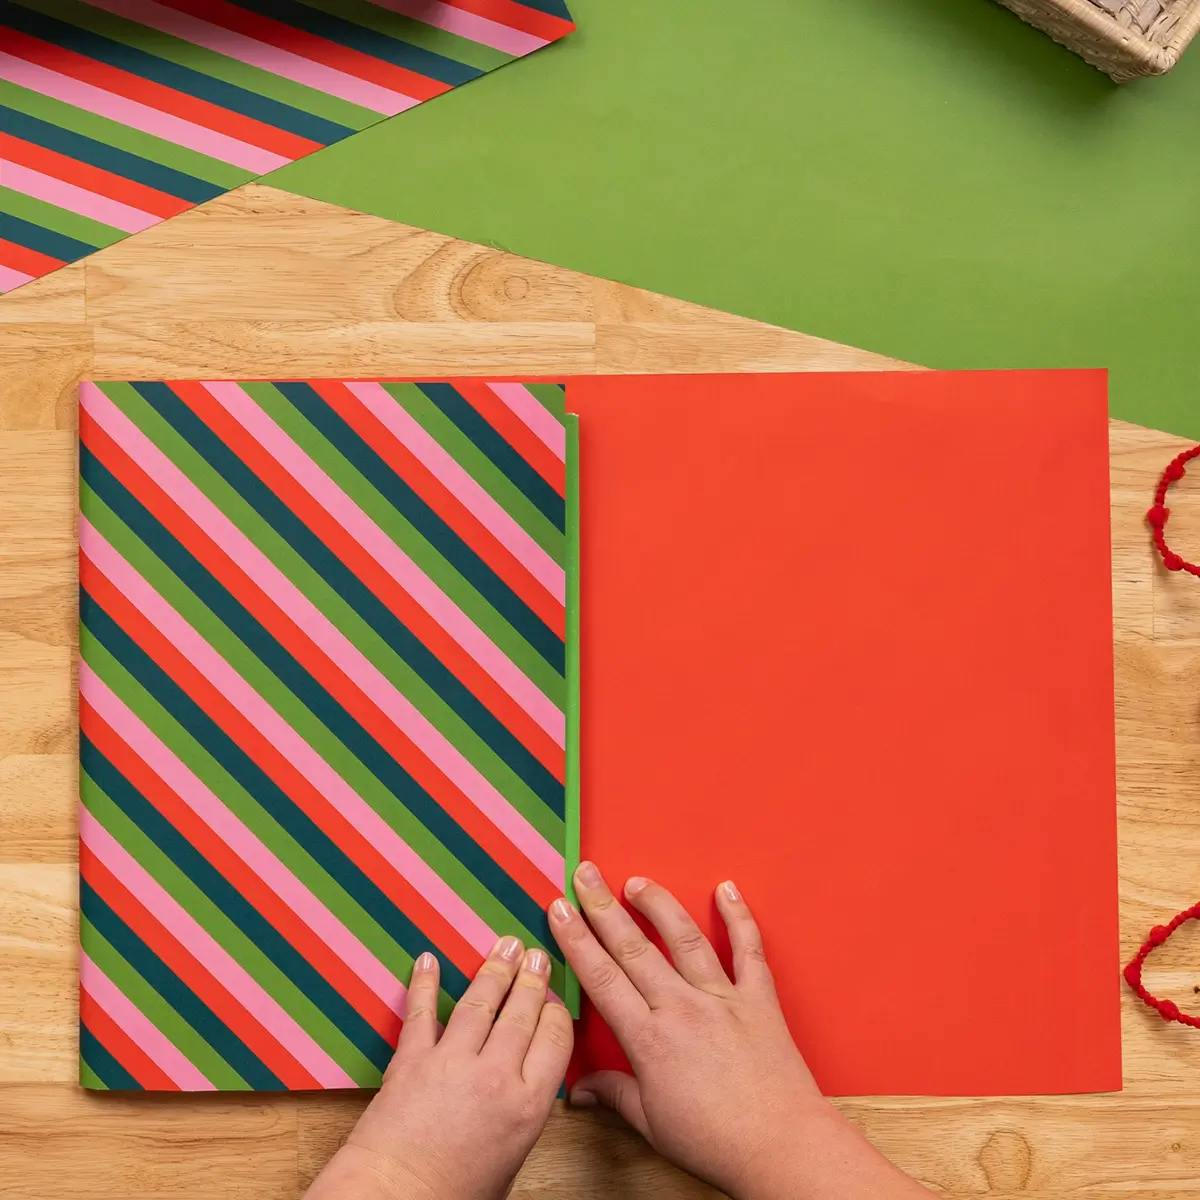 Folding wrapping paper to the edge of a book, in a tutorial on how to wrap a book.